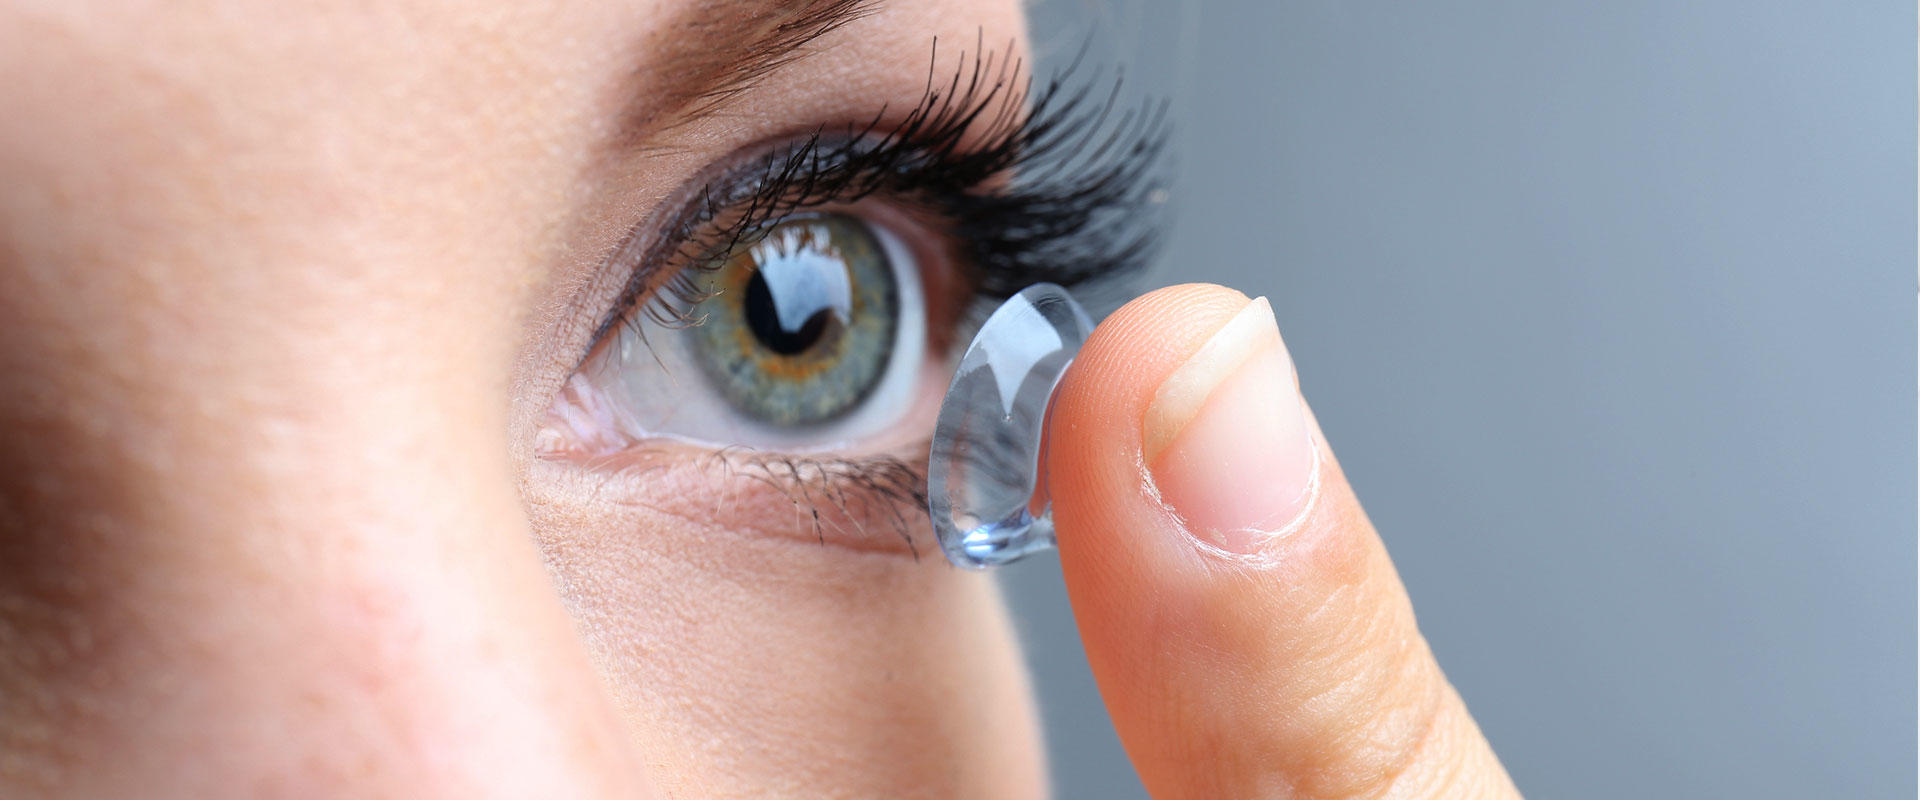 Billings Vision & Contact Lens Clinic Photo